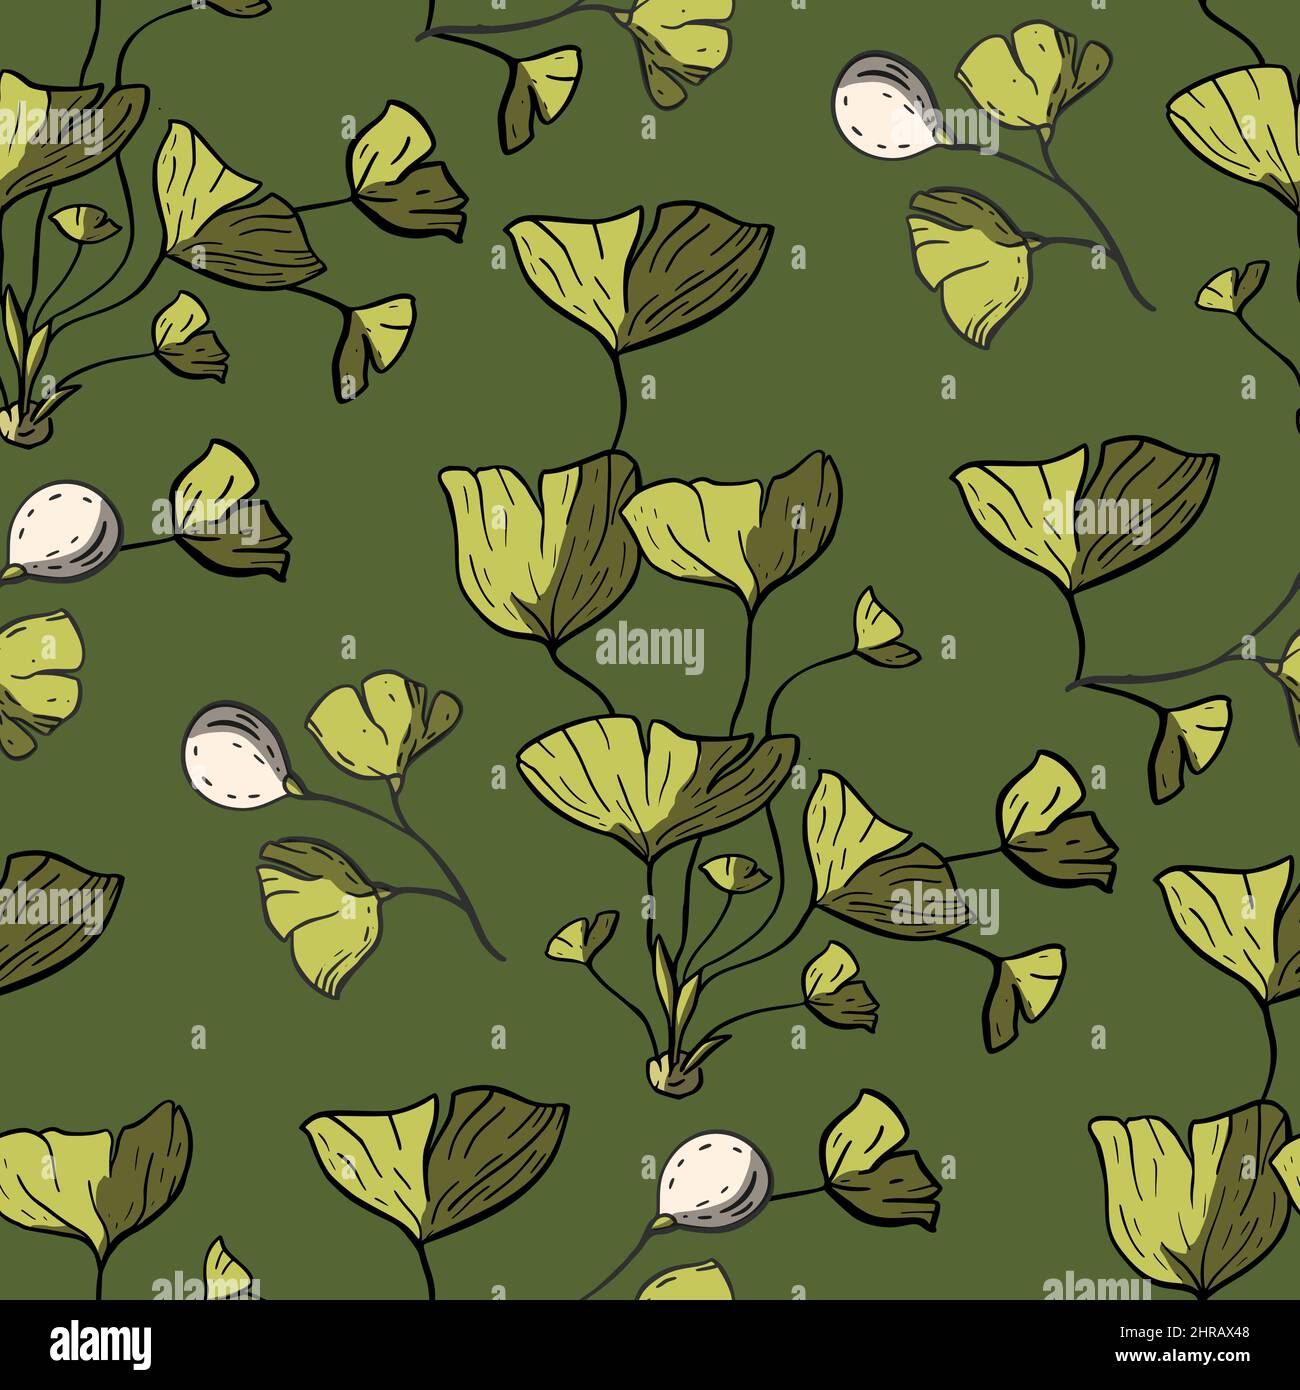 Vintage berry cartoon seamless pattern, green floral background Stock Vector